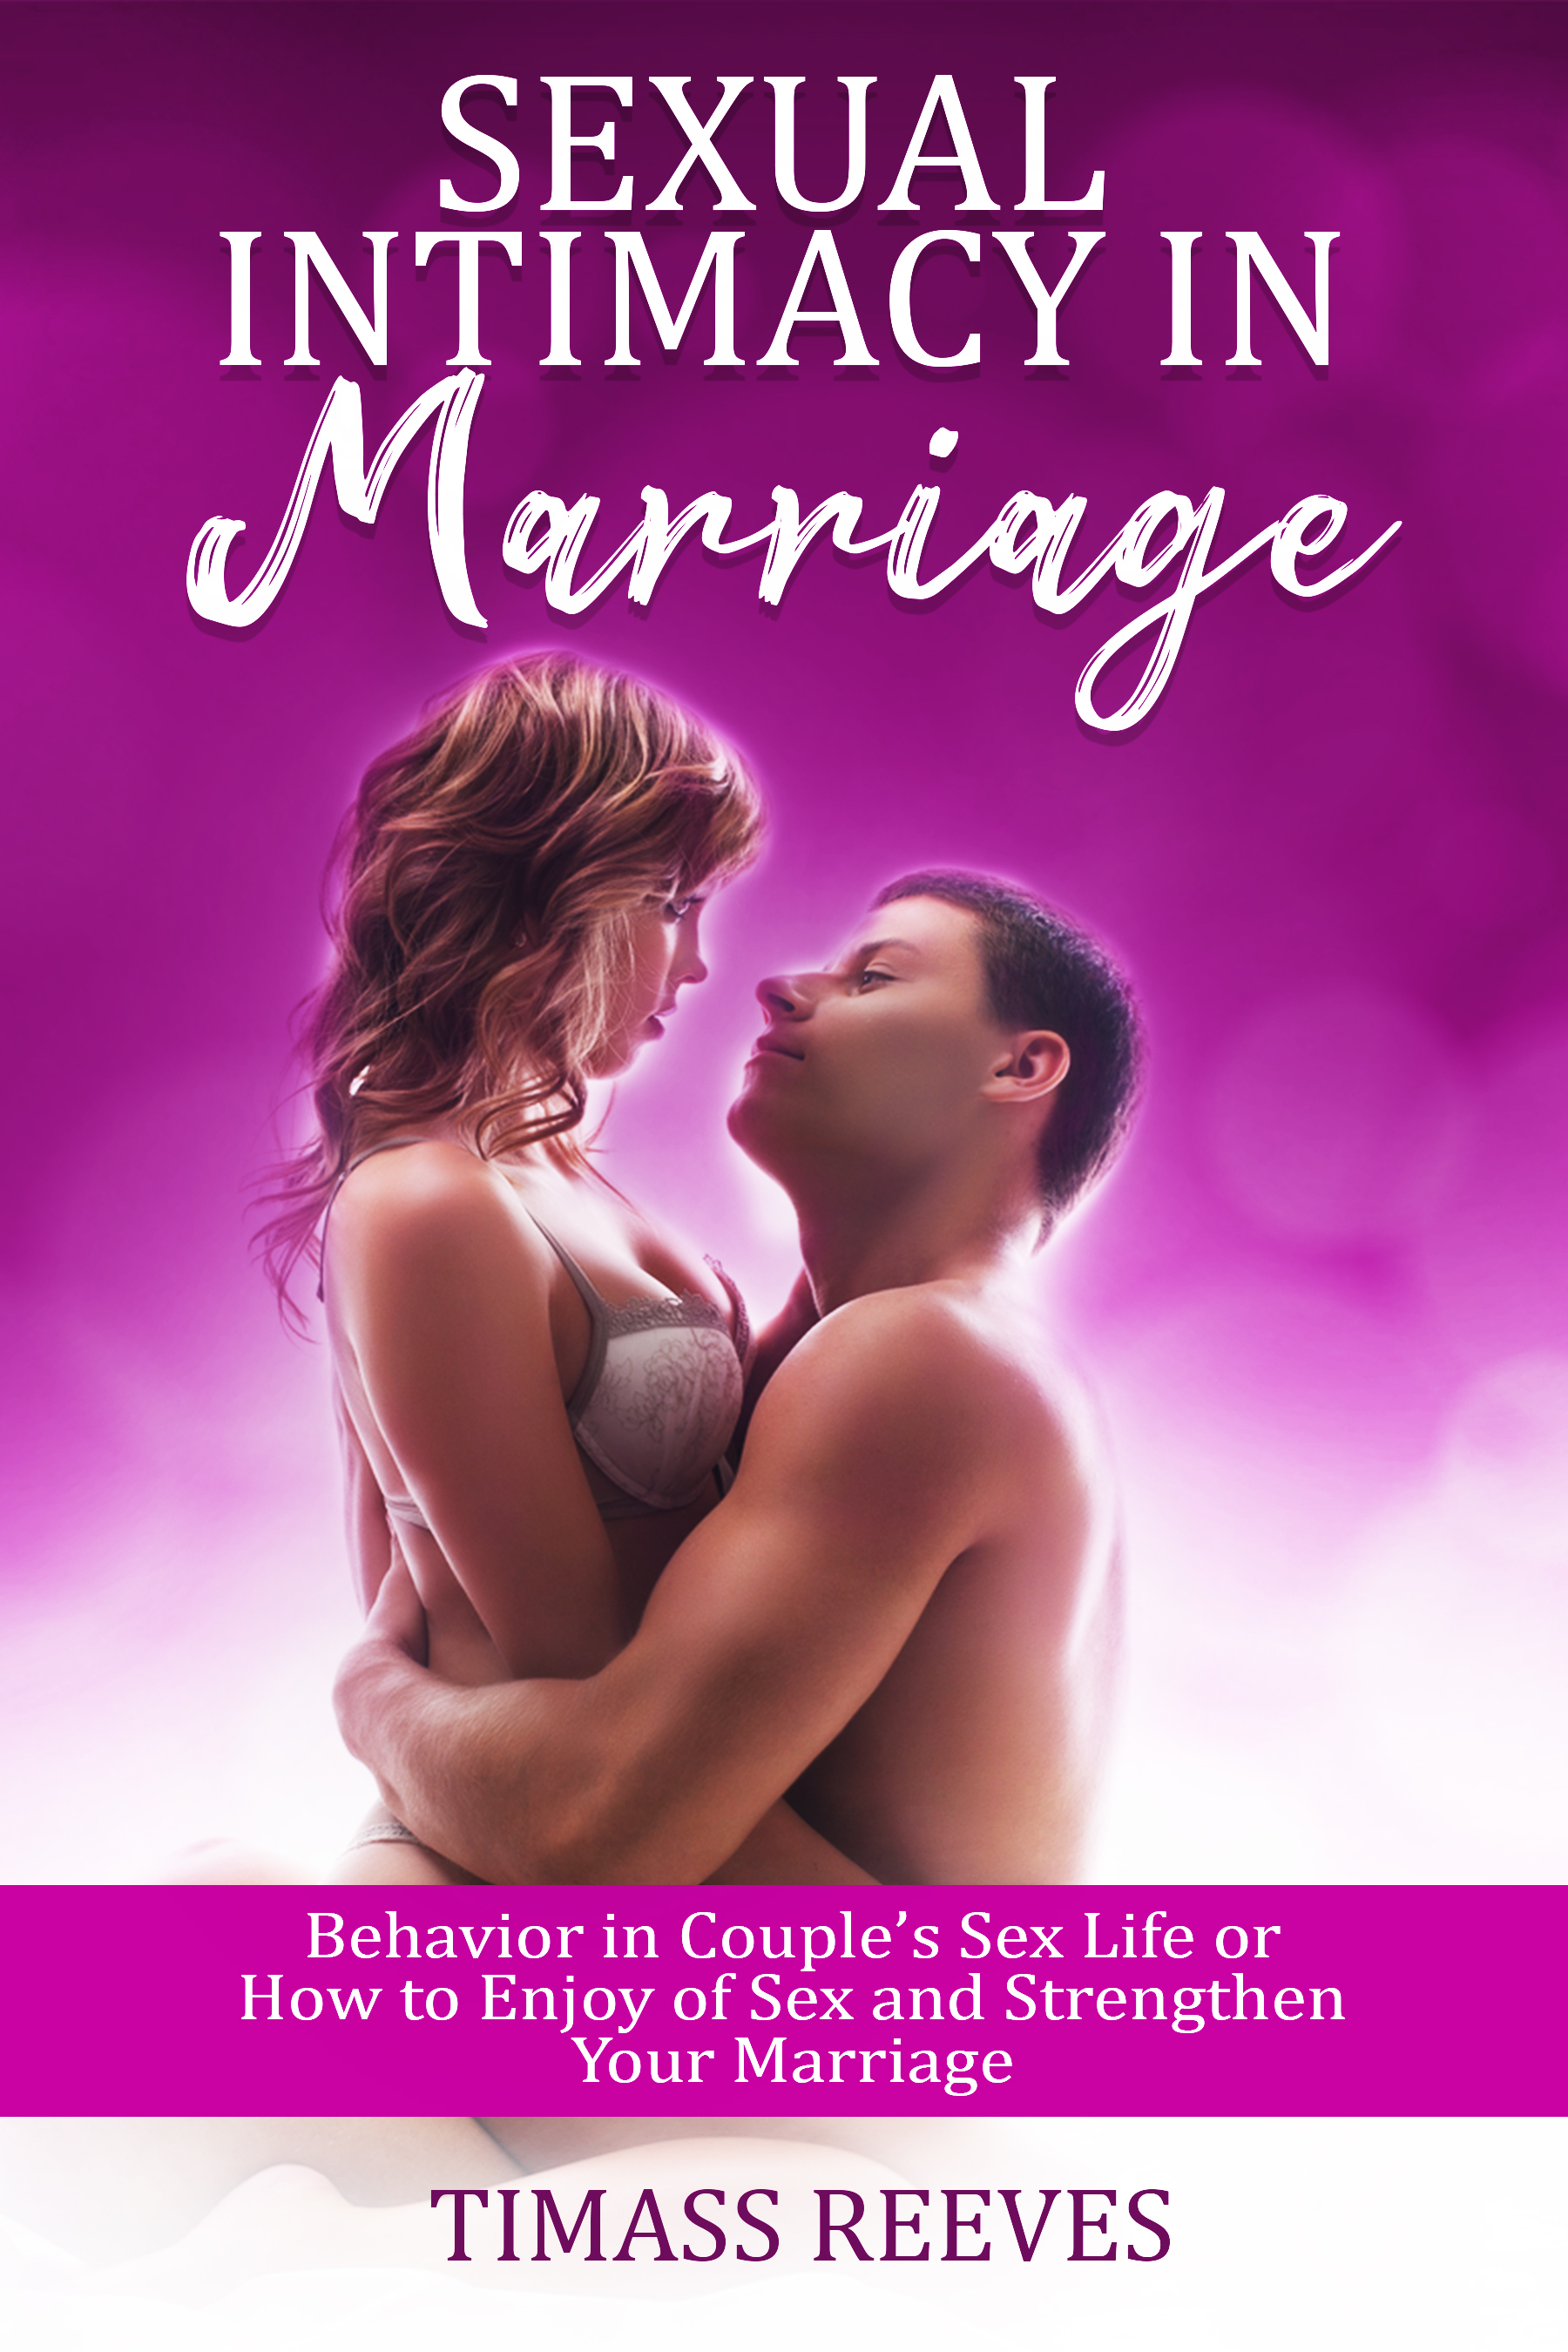 Sexual Intimacy in Marriage: Behavior in Couple’s Sex Life or How to Enjoy of Sex and Strengthen Your Marriage by Timass Reeves